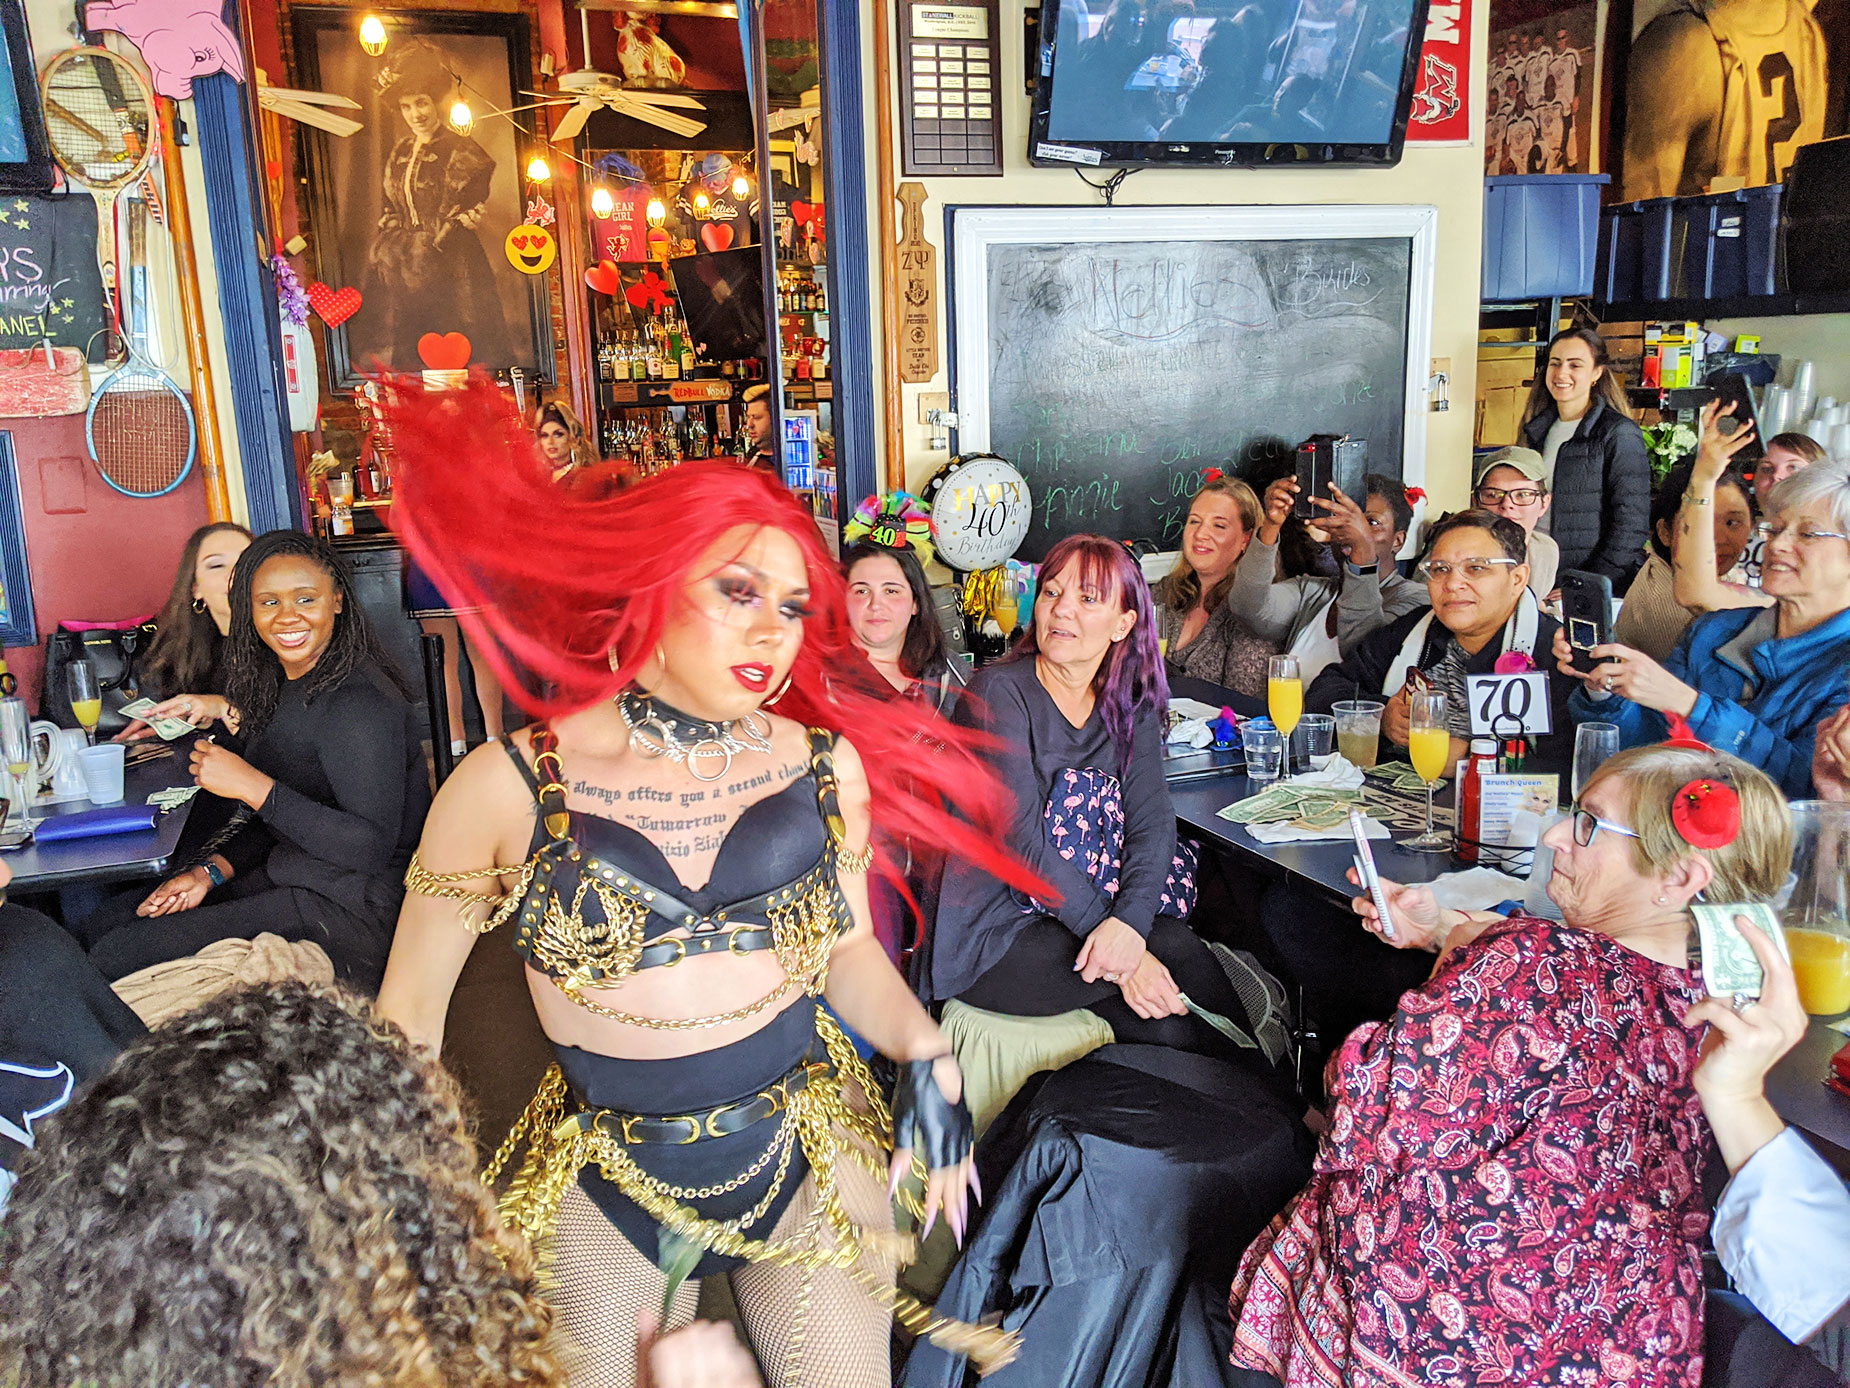 Labella Mafia performing at Chanellie's Drag Queen Brunch.